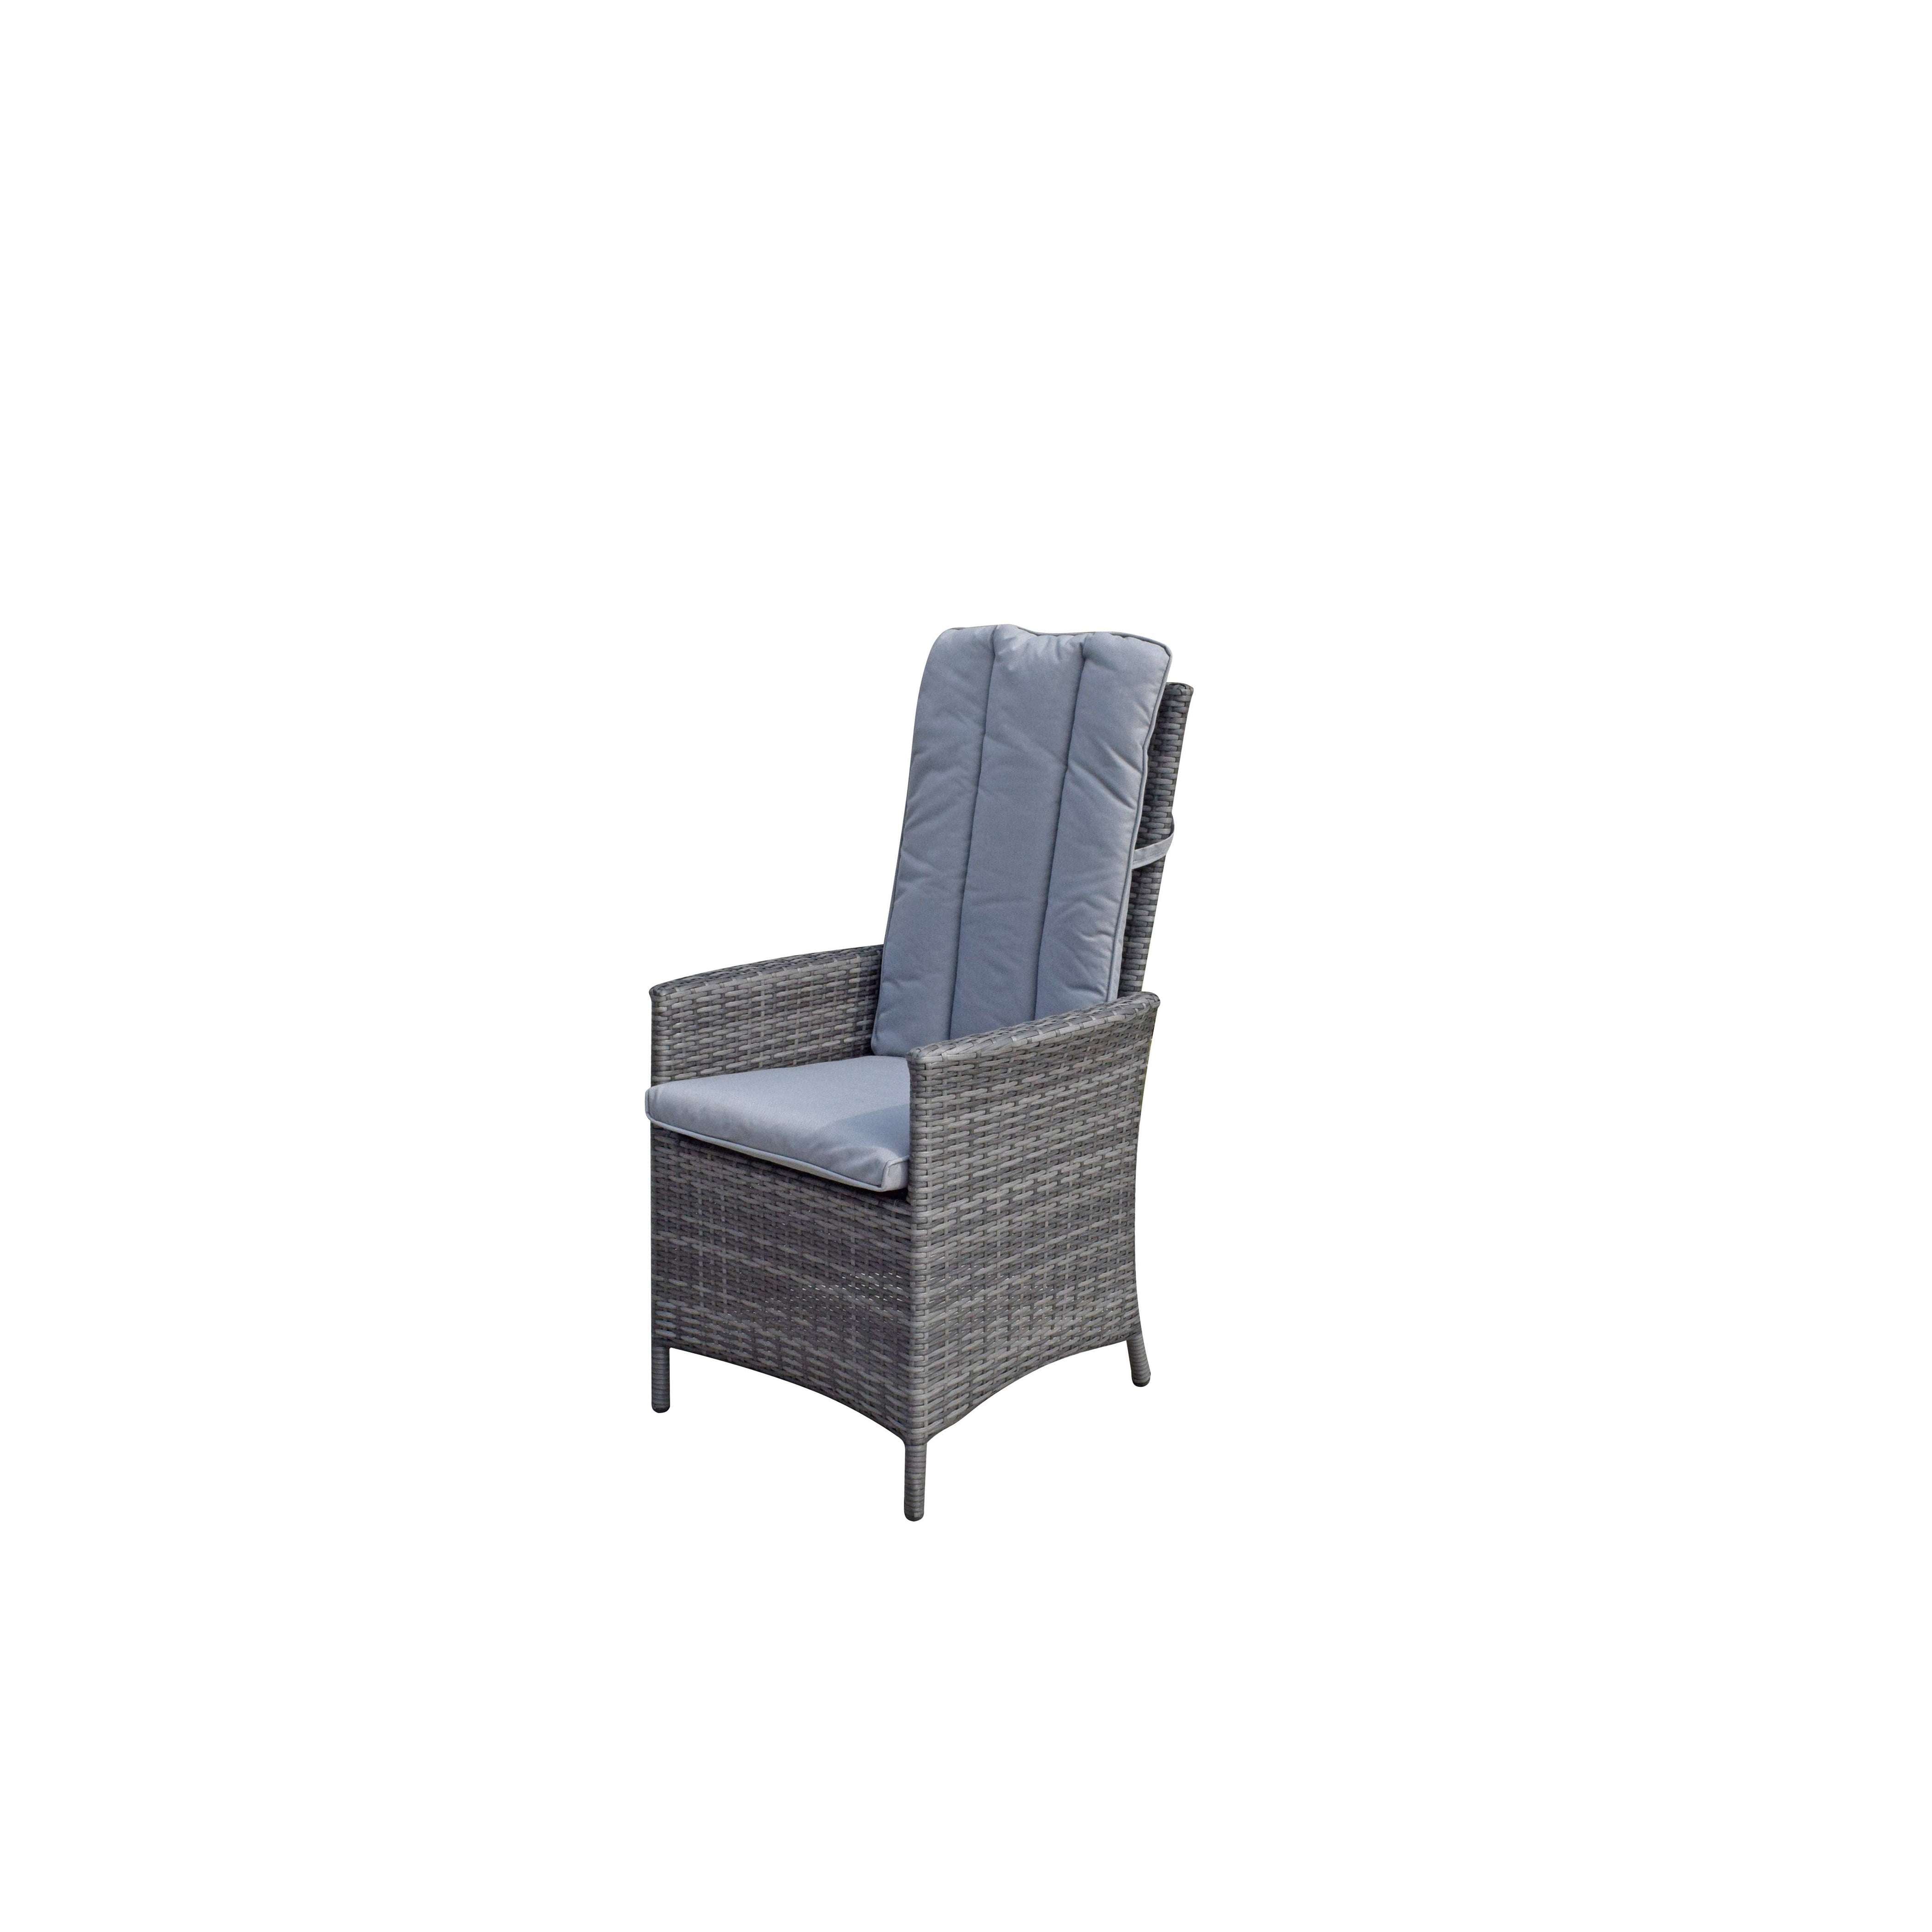 Exceptional Garden:Signature Weave Emily Reclining Dining Chairs